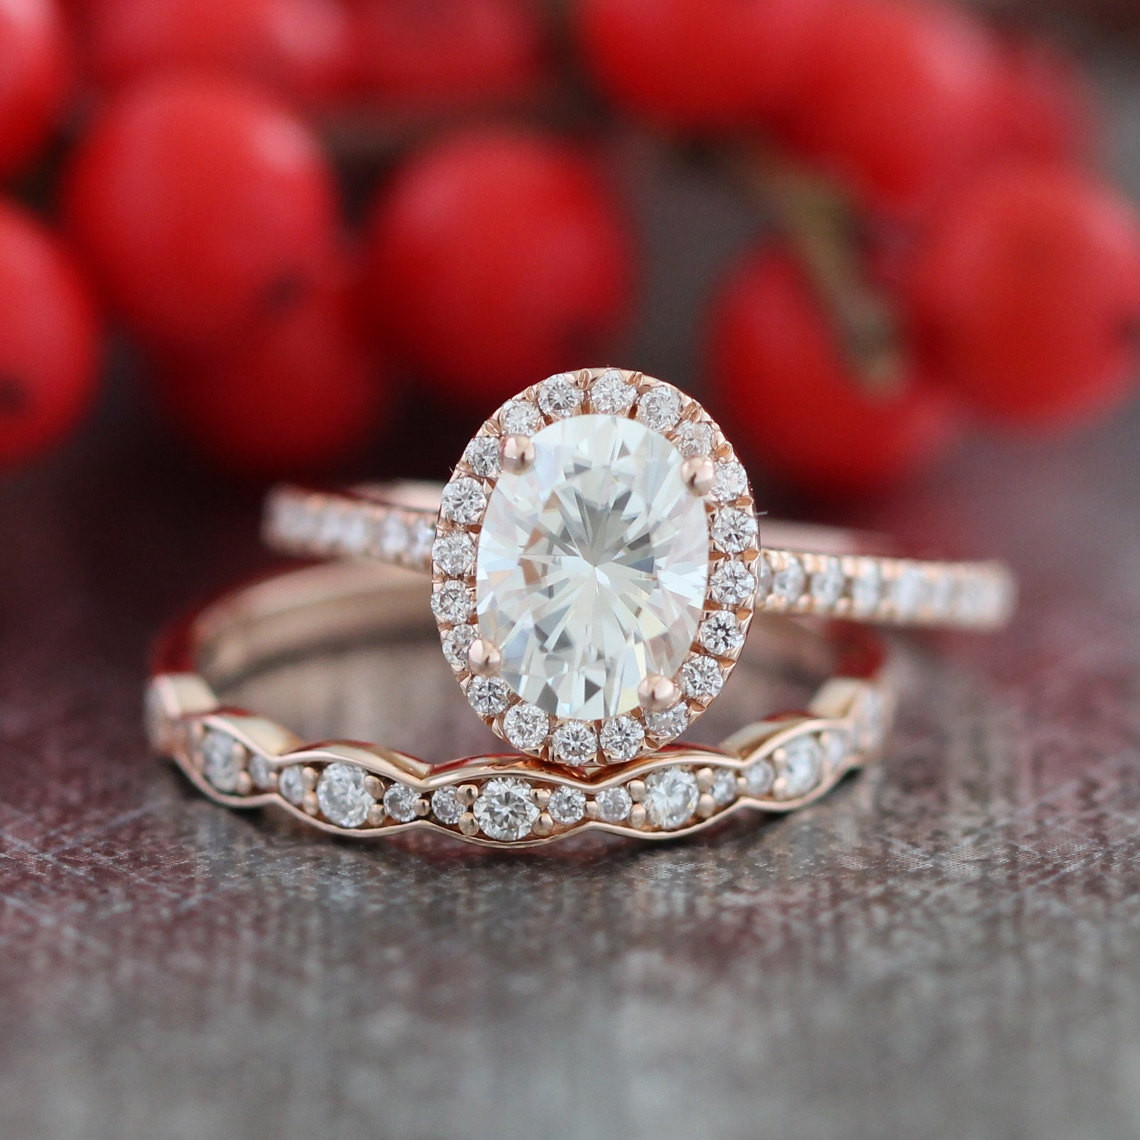 Wedding Bands For Halo Rings
 Halo Diamond Moissanite Engagement Ring 14k Rose Gold and